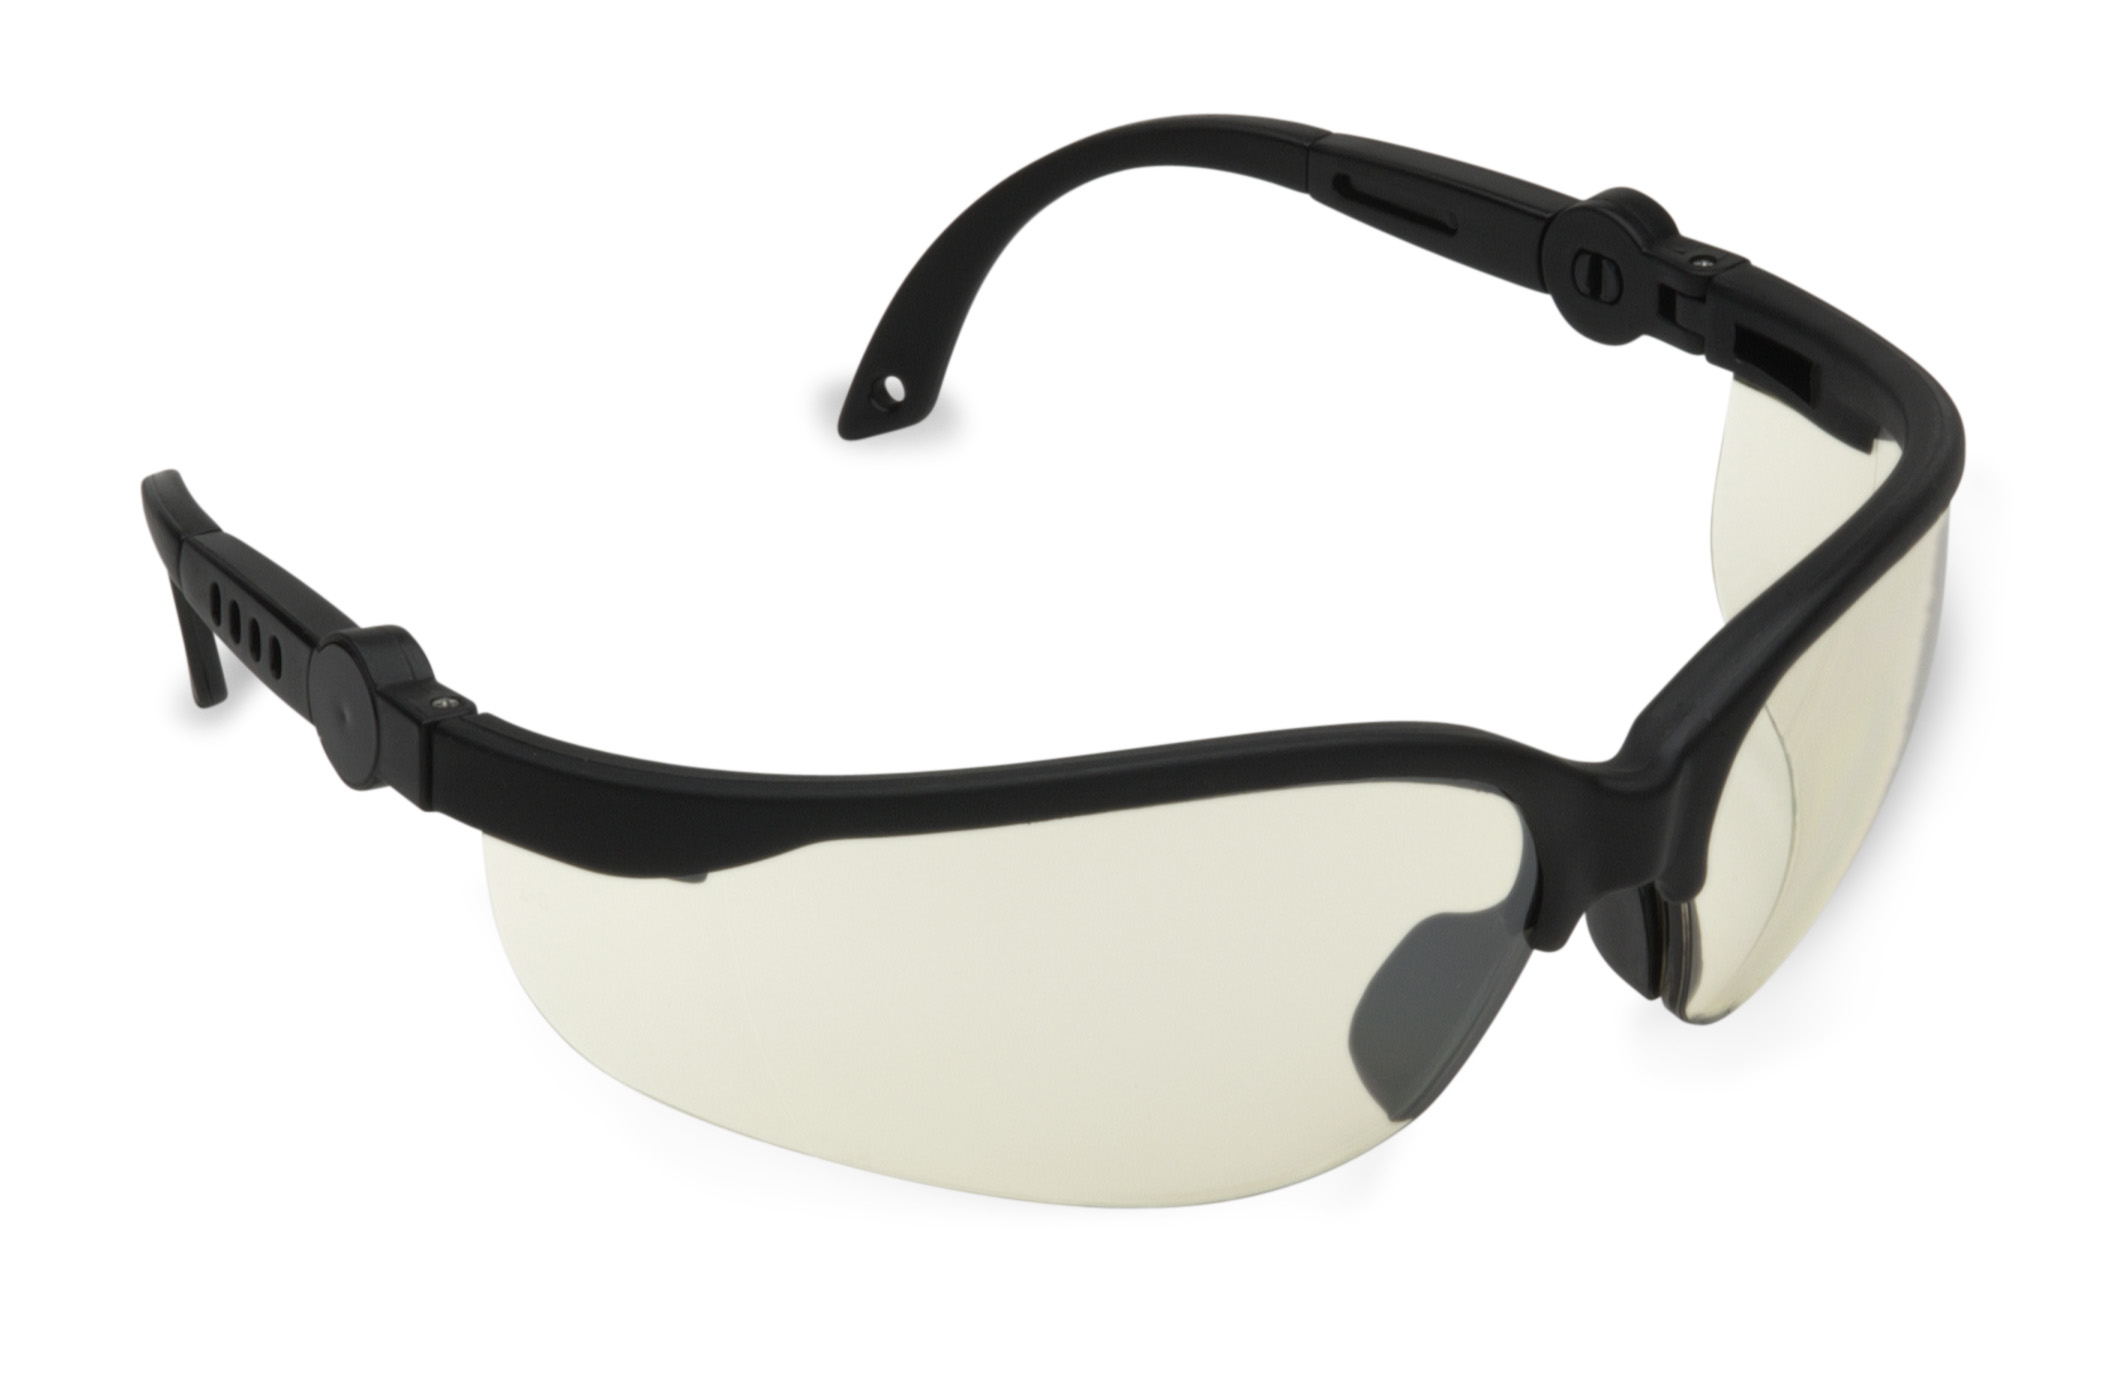 Indoor-Outdoor,
Scratch-Resistant
Polycarbonate Lens, Matte
Black Nylon Frame, Dual
Wrap-Around Lens, Extendable
&amp; Ratcheting Temples, TPR
Nose Piece, Meets ANSI Z87.1+
Standards, Provides 99.9% UV
Protection